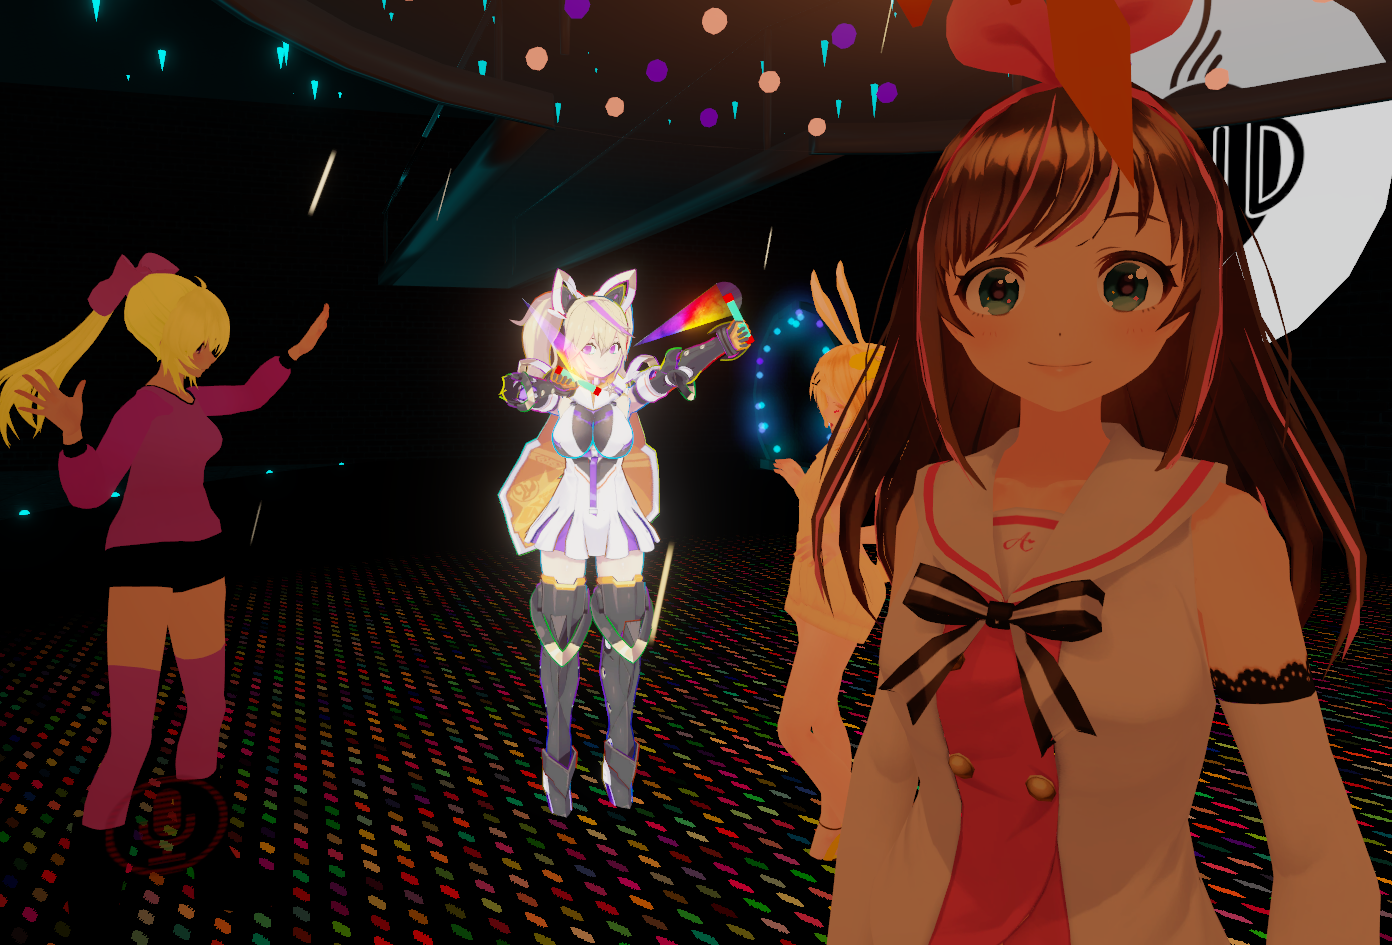 Cute Vrchat Characters